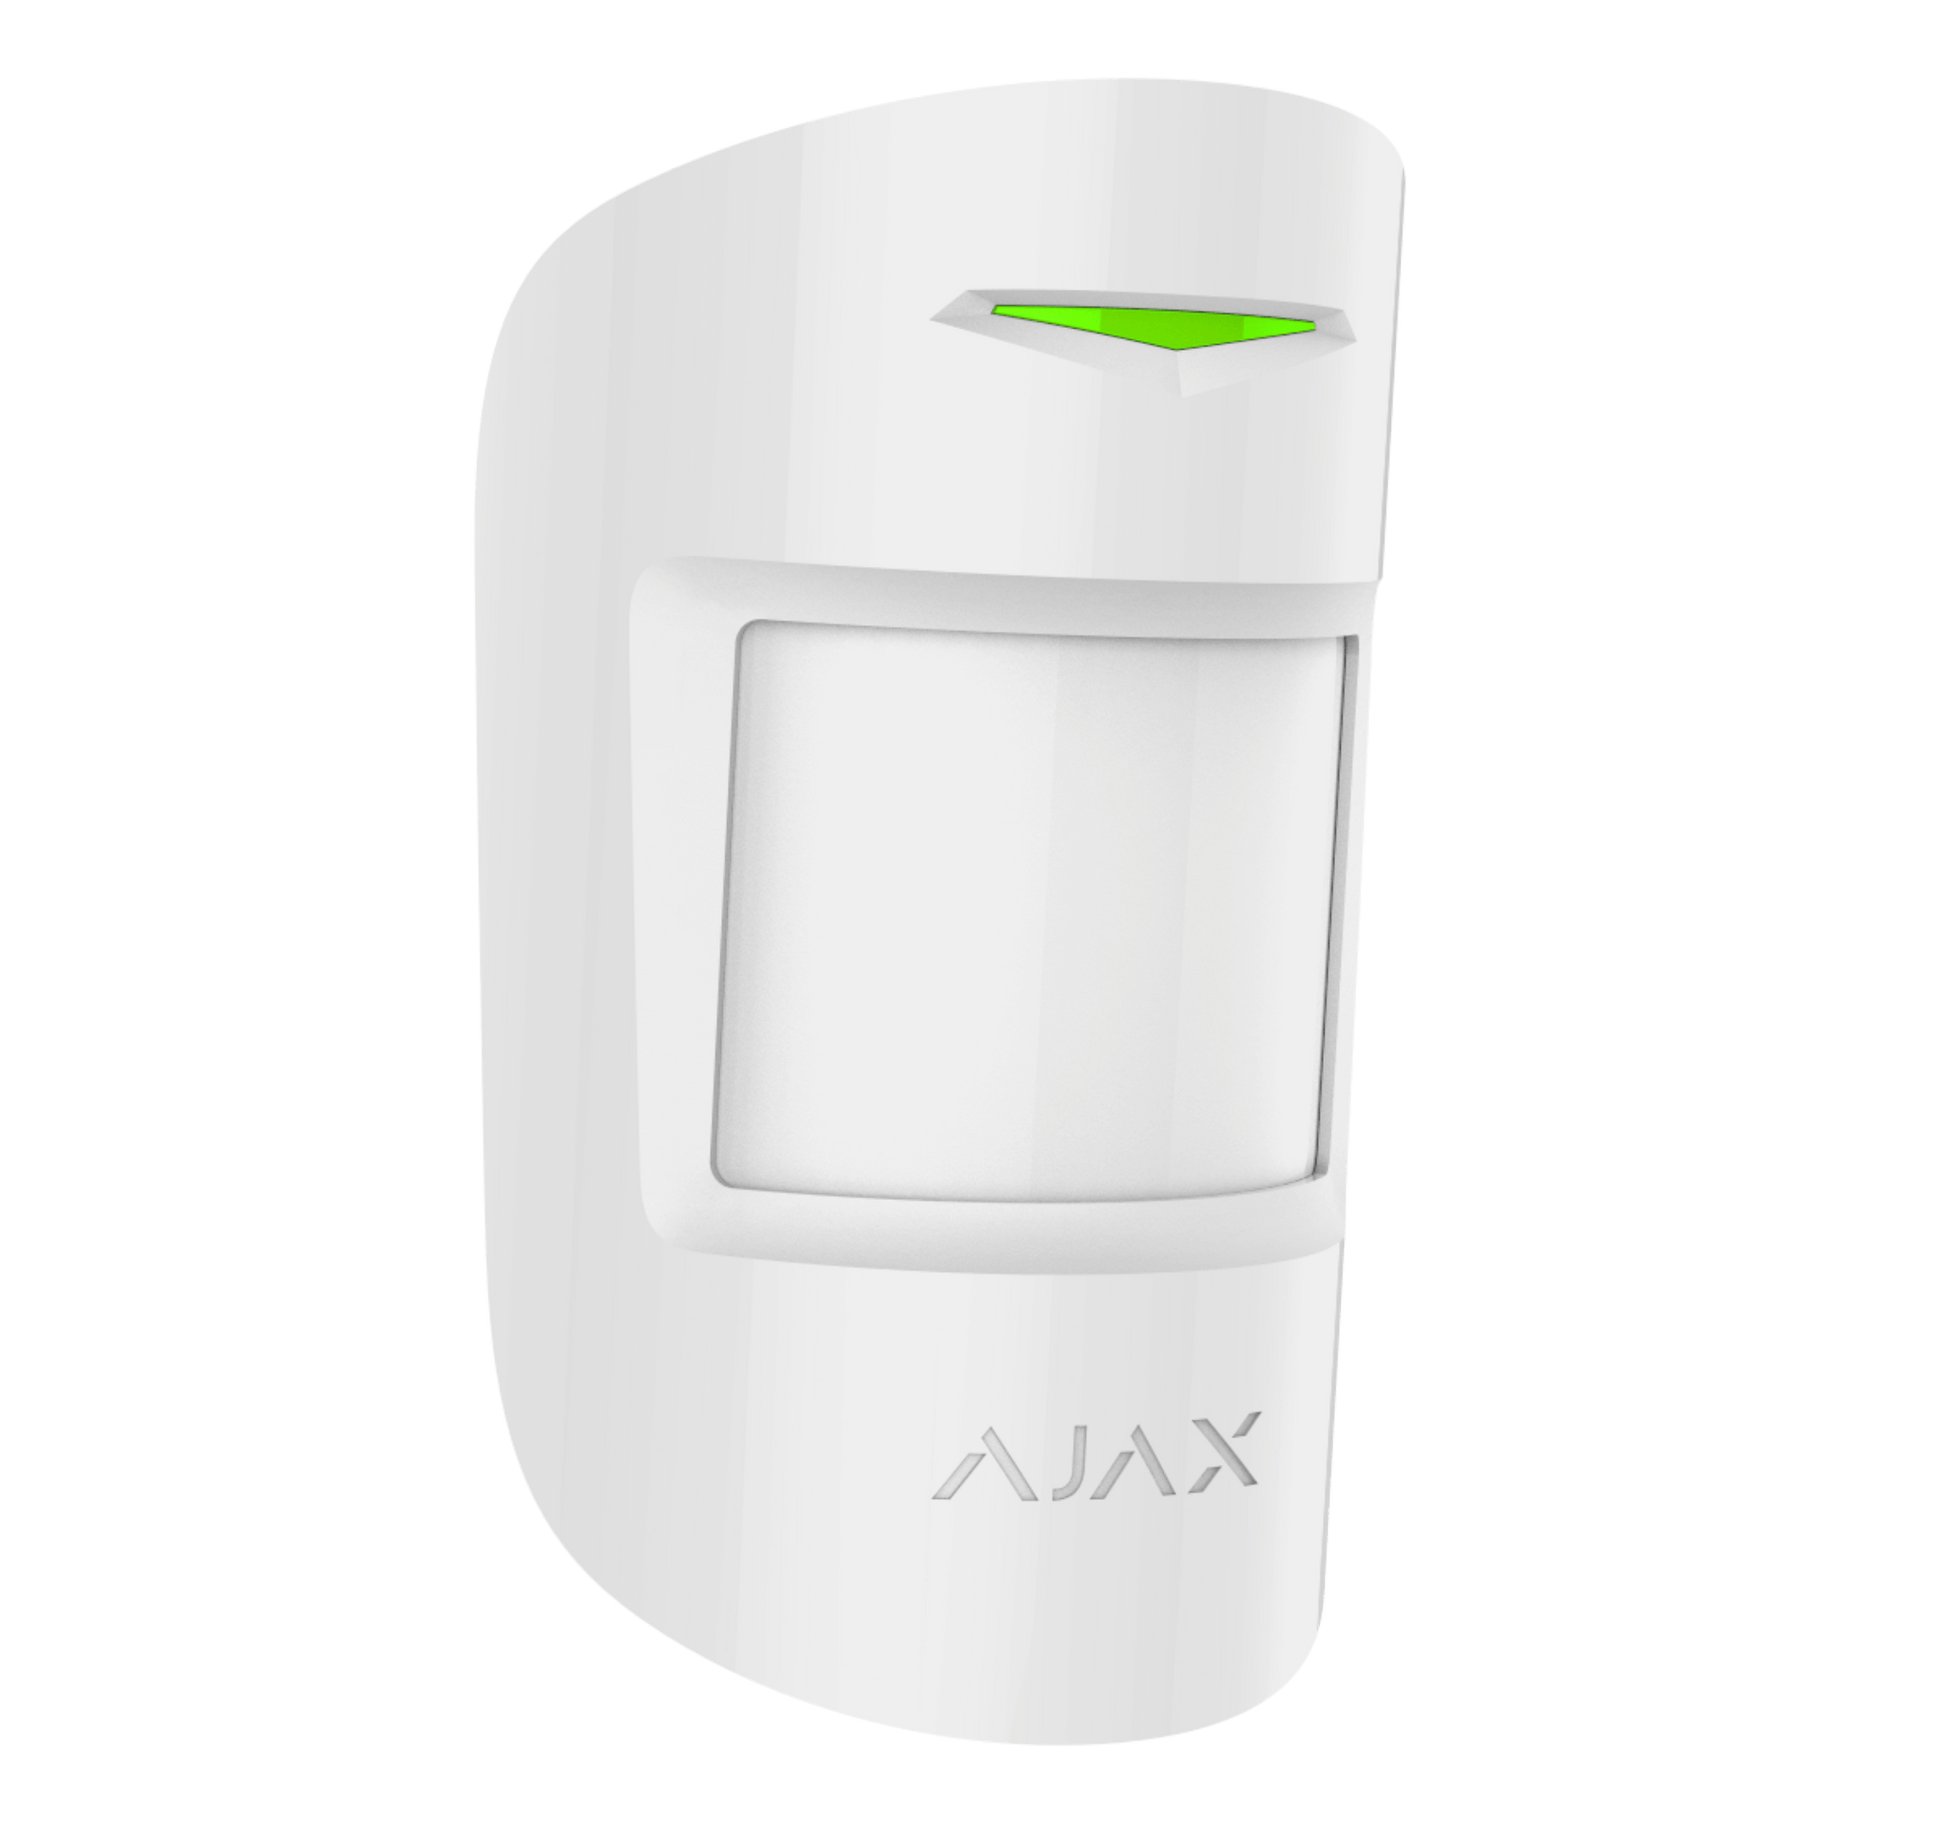 White Ajax MotionProtect wireless motion sensor from Ajax Security Systems, 110 × 65 × 50 mm in size, 86grams in weight . for smart home and business security, Turned view of device